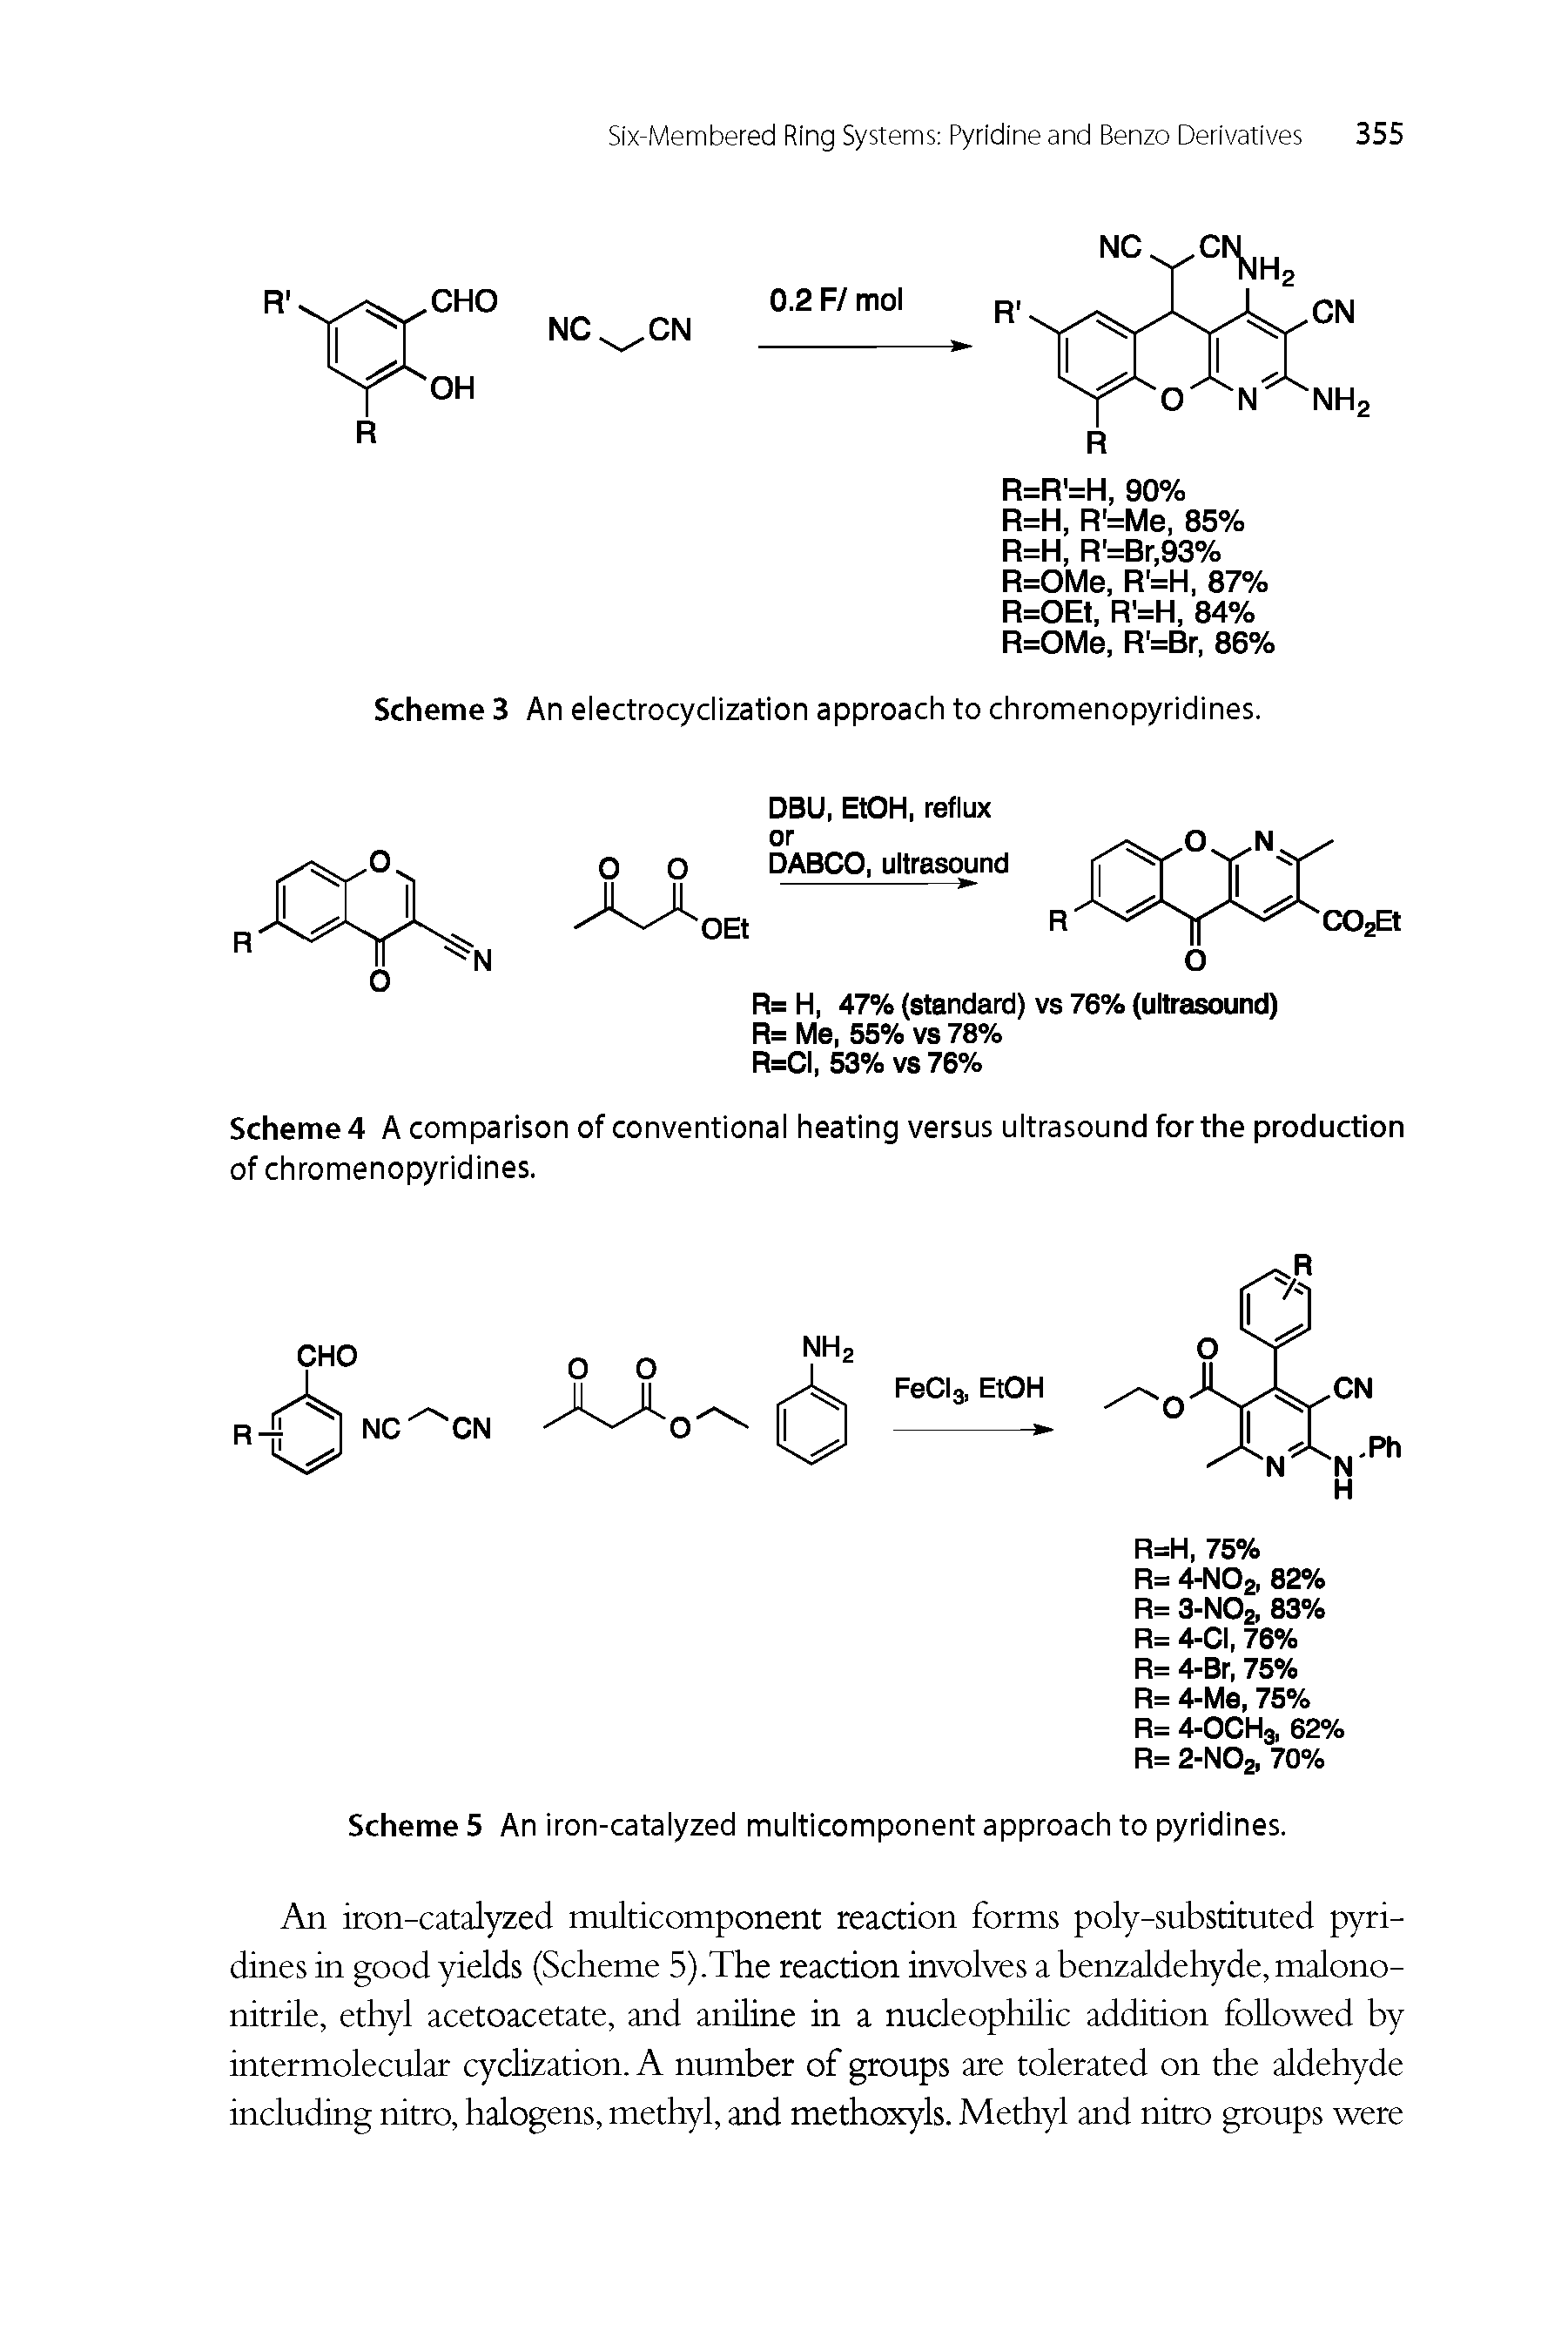 Scheme 5 An iron-catalyzed multicomponent approach to pyridines.